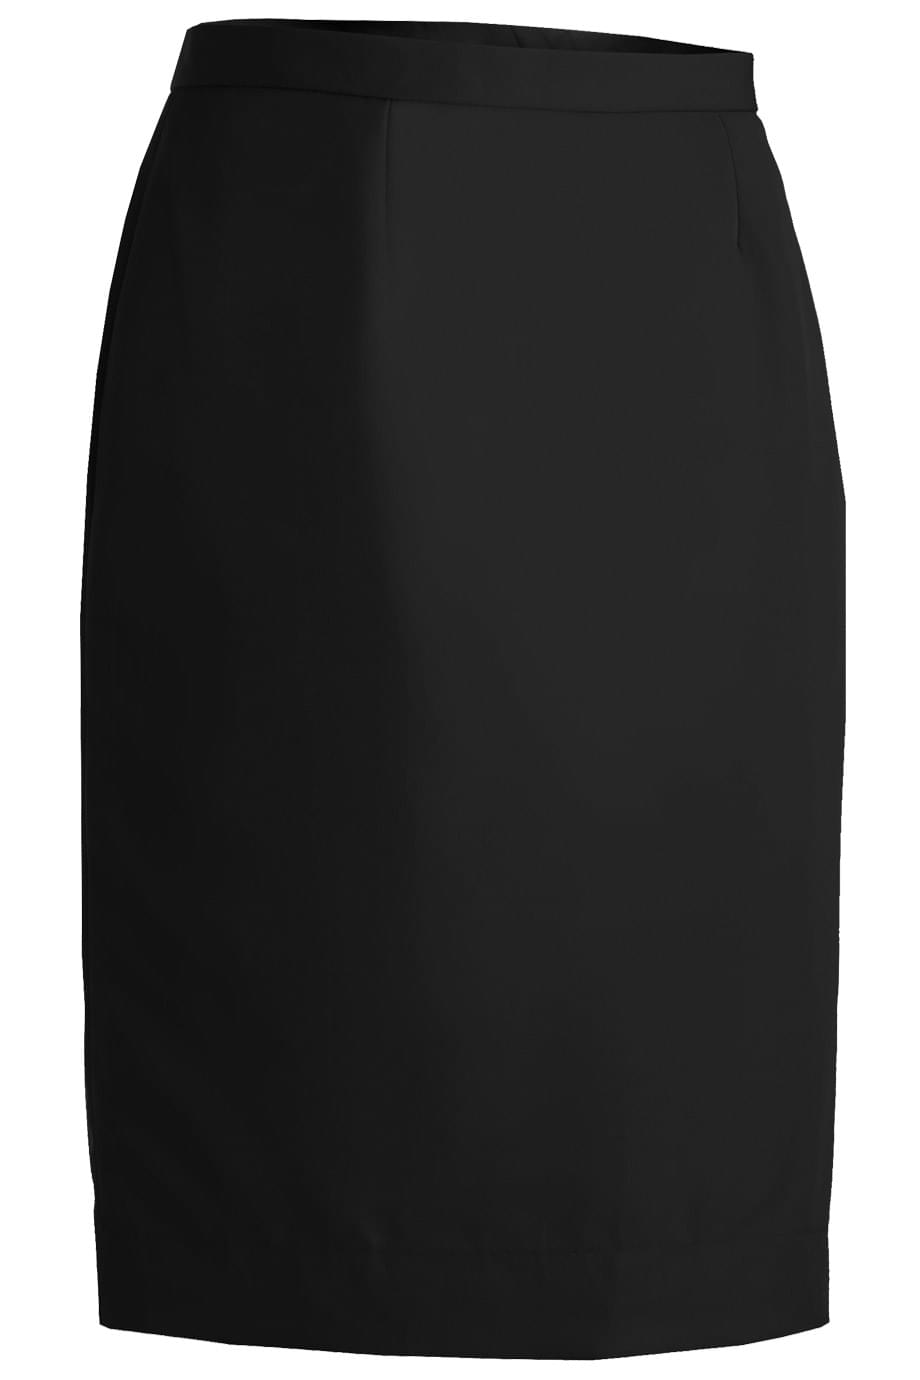 EDWARDS LADIES’ POLYESTER STRAIGHT SKIRT | Uniforms Today